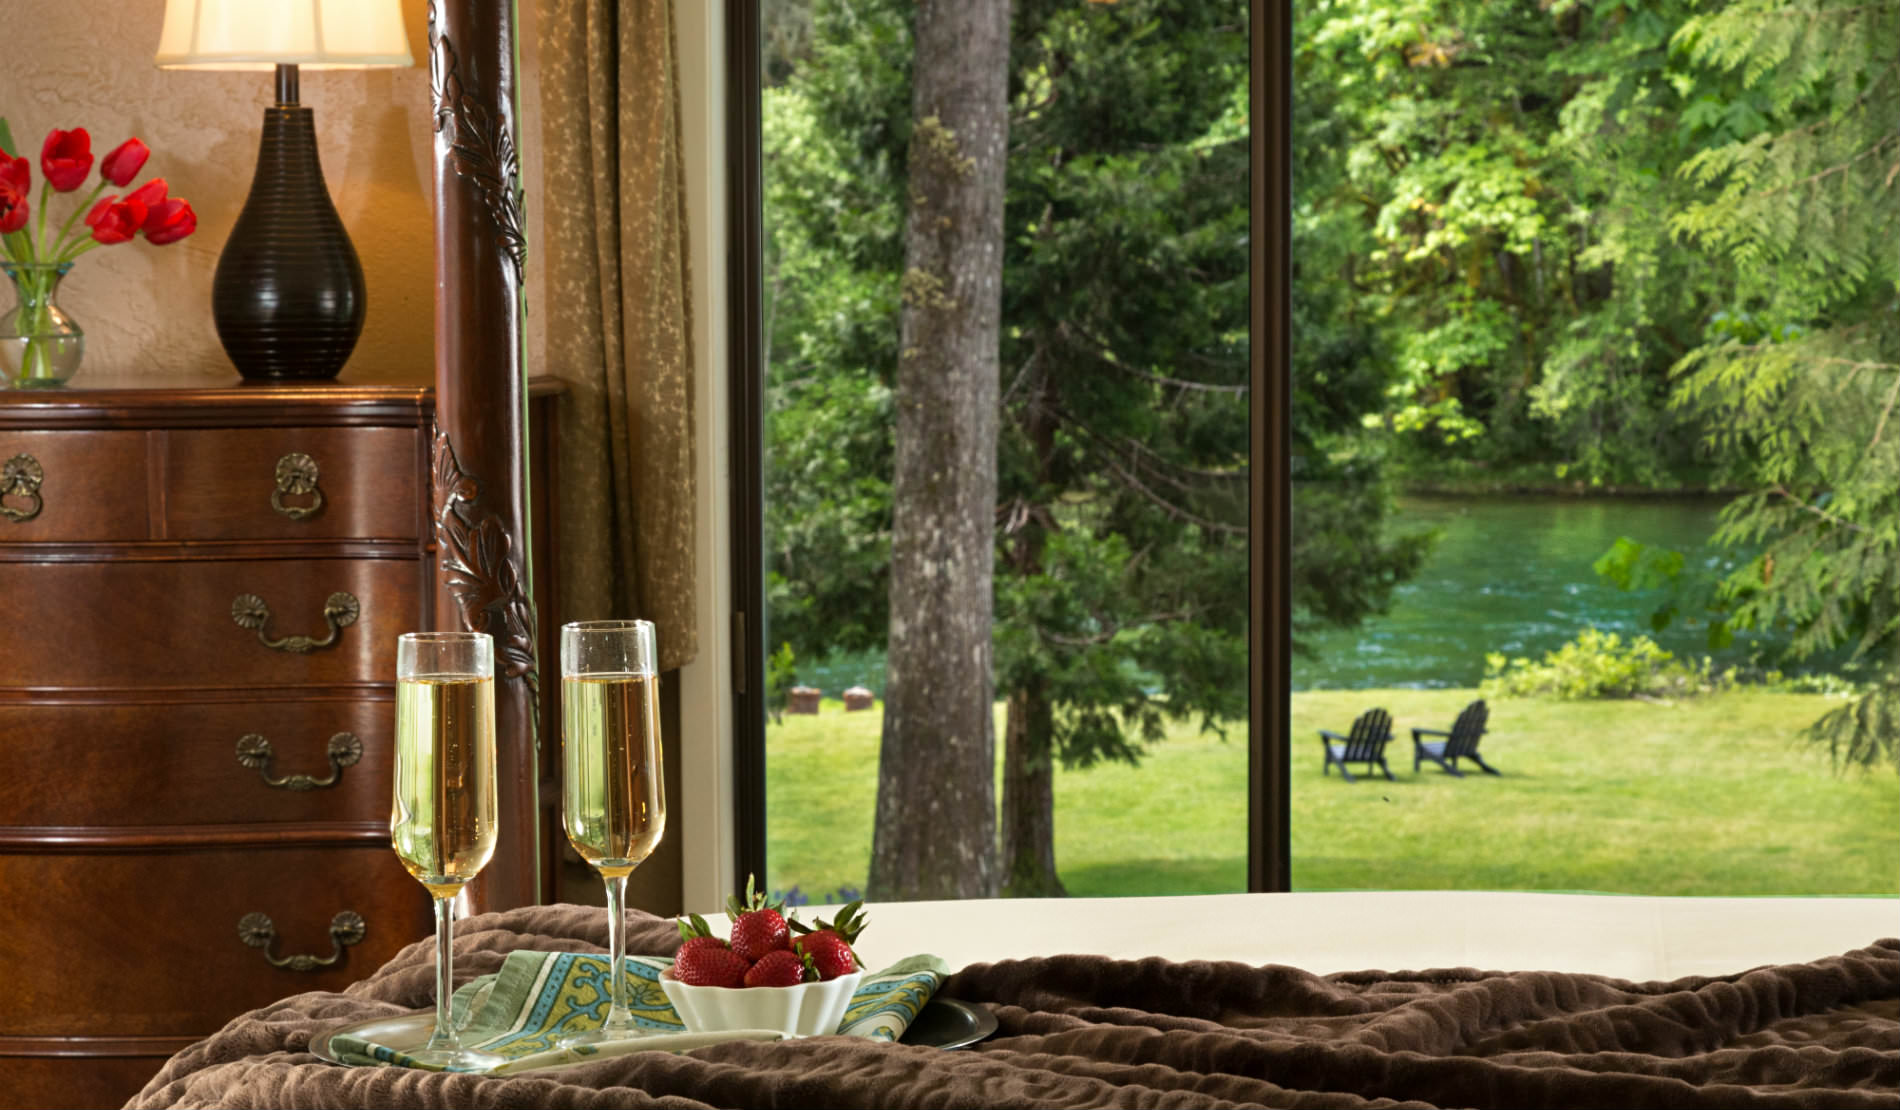 View from bed with two glasses of champagne and strawberries to brown dresser and grassy area and river, two chairs.